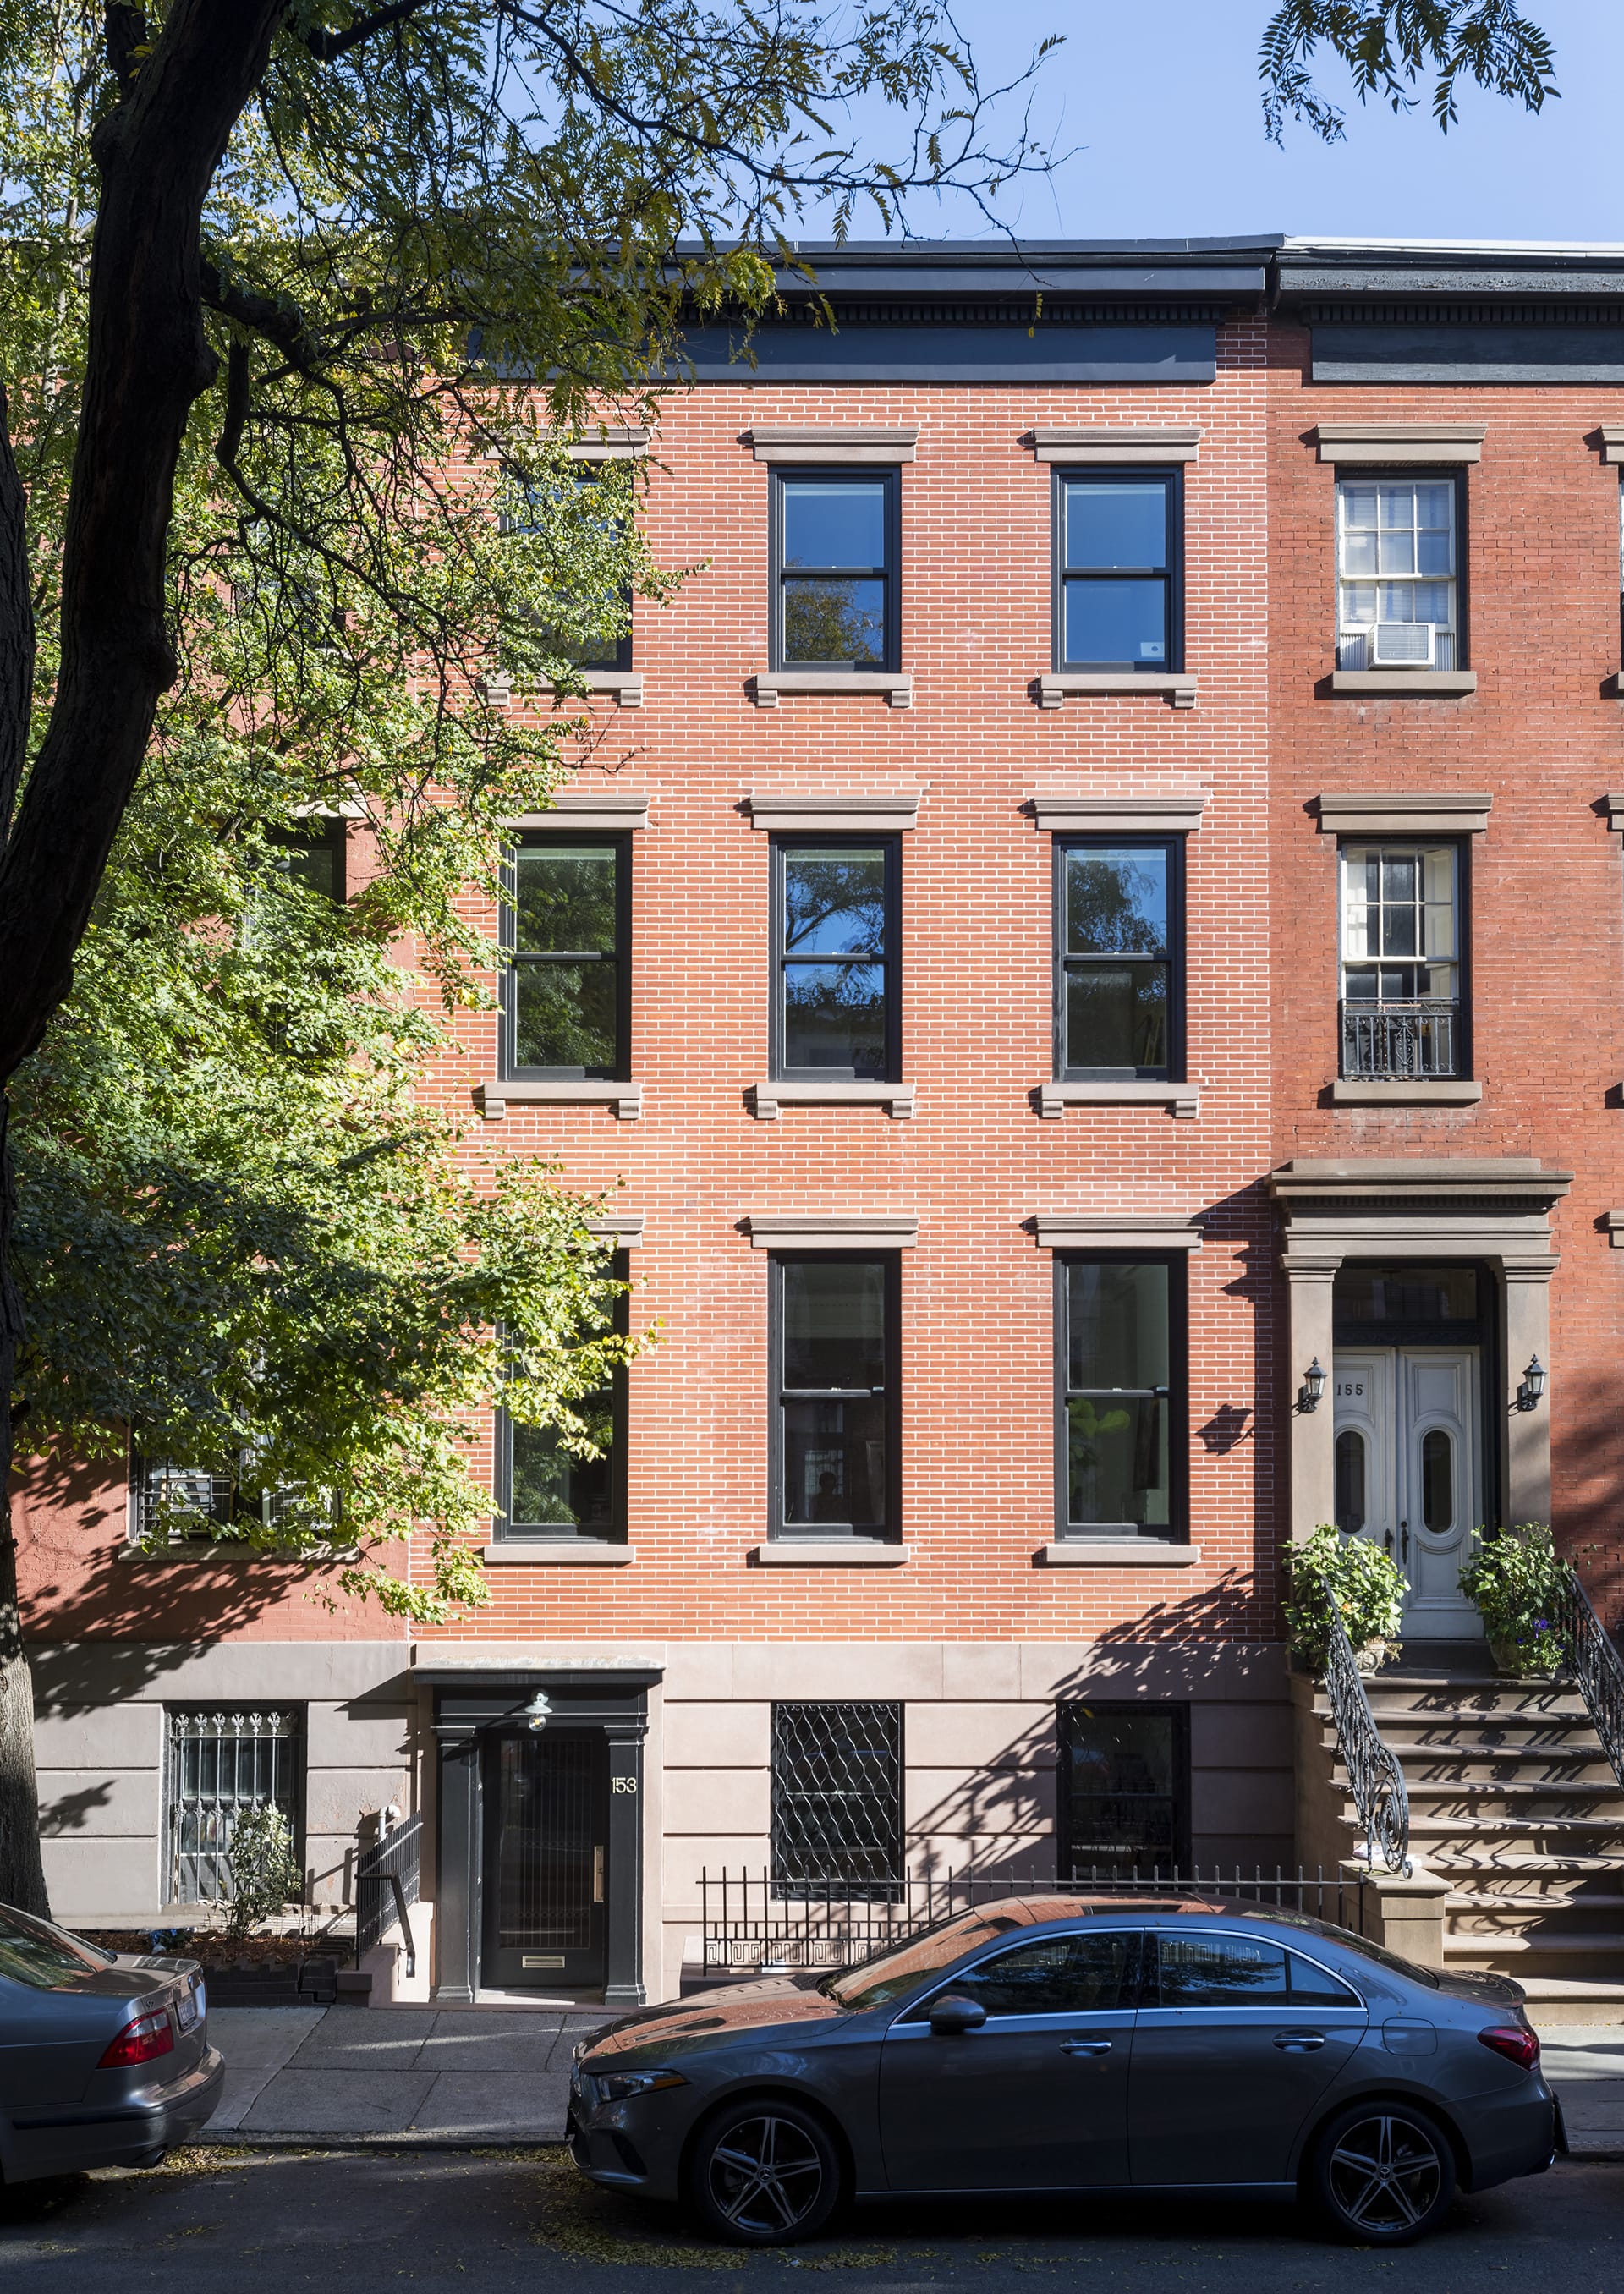 Front façade of a brick townhouse with brownstone lintels and details after our renovation